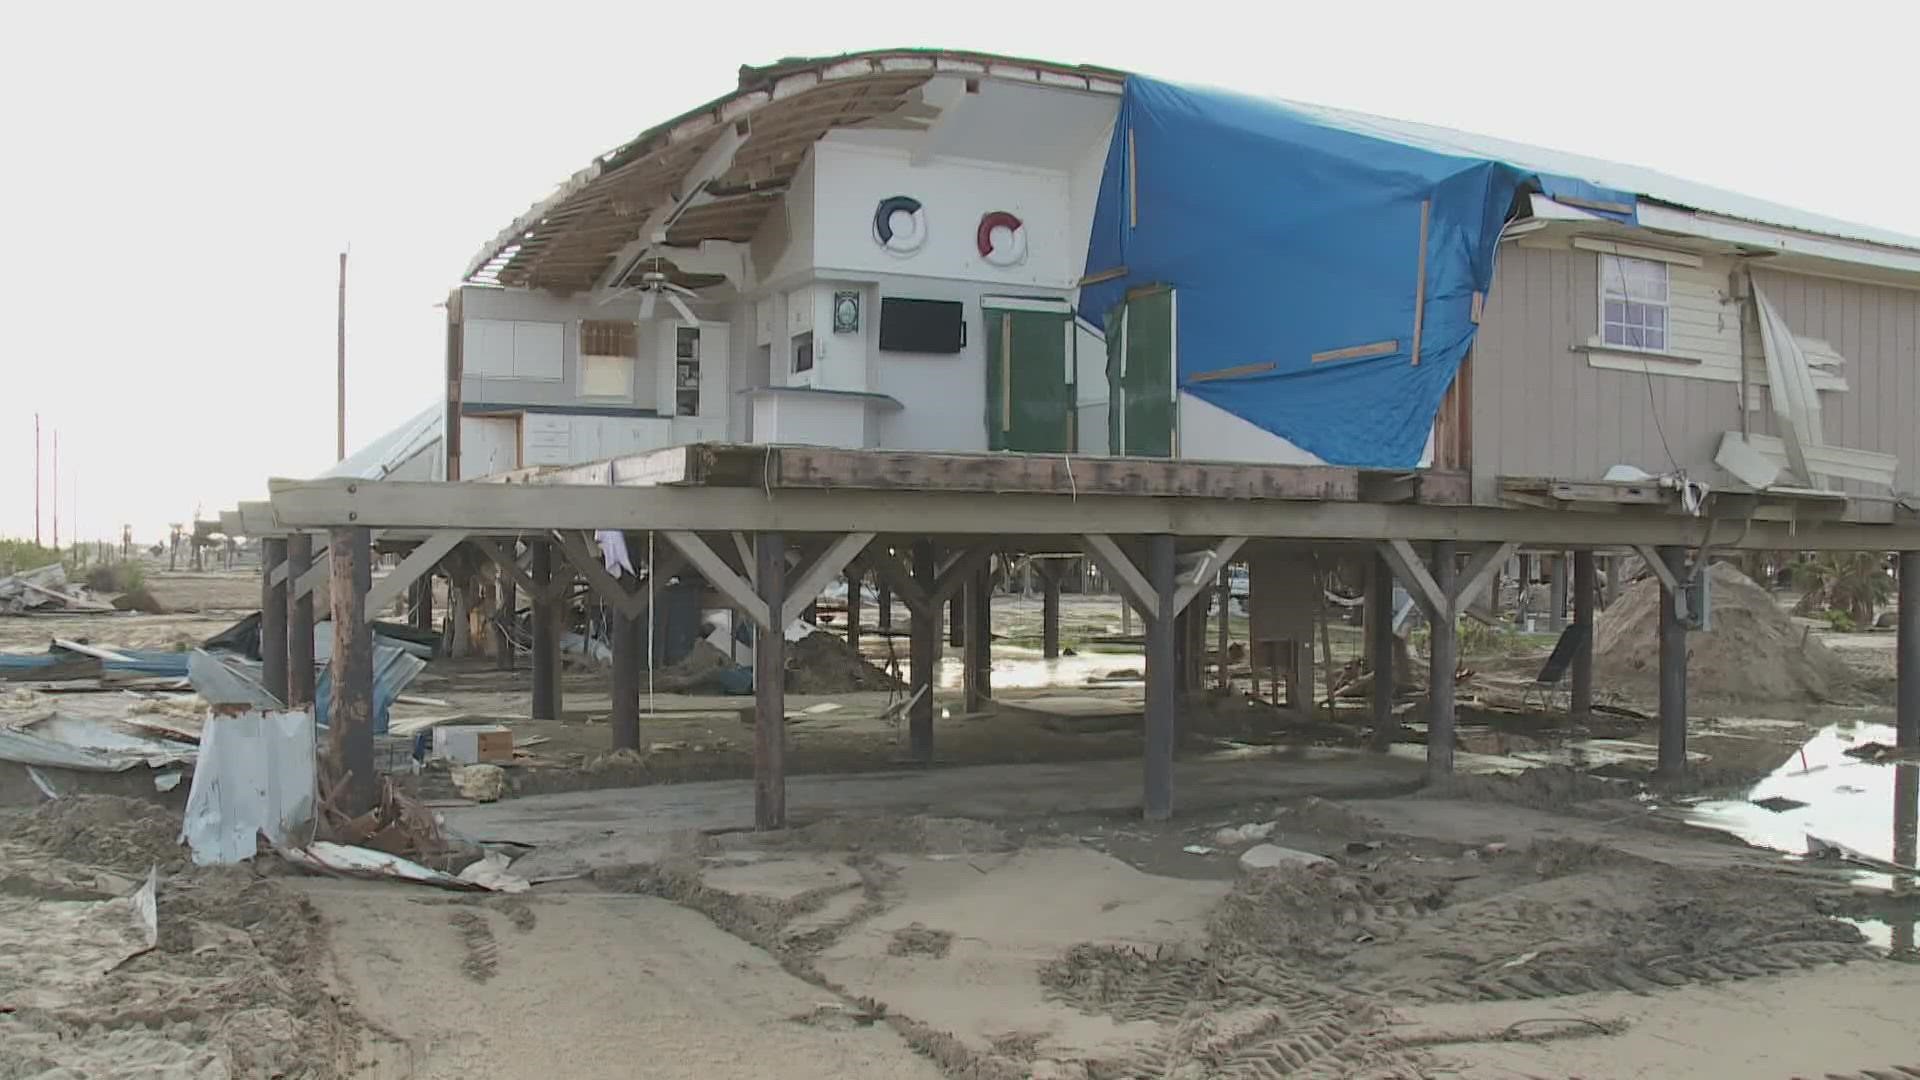 Of the approximately 2,700 structures on Grand Isle, Templet says about 25 percent are gone, many others ripped apart.